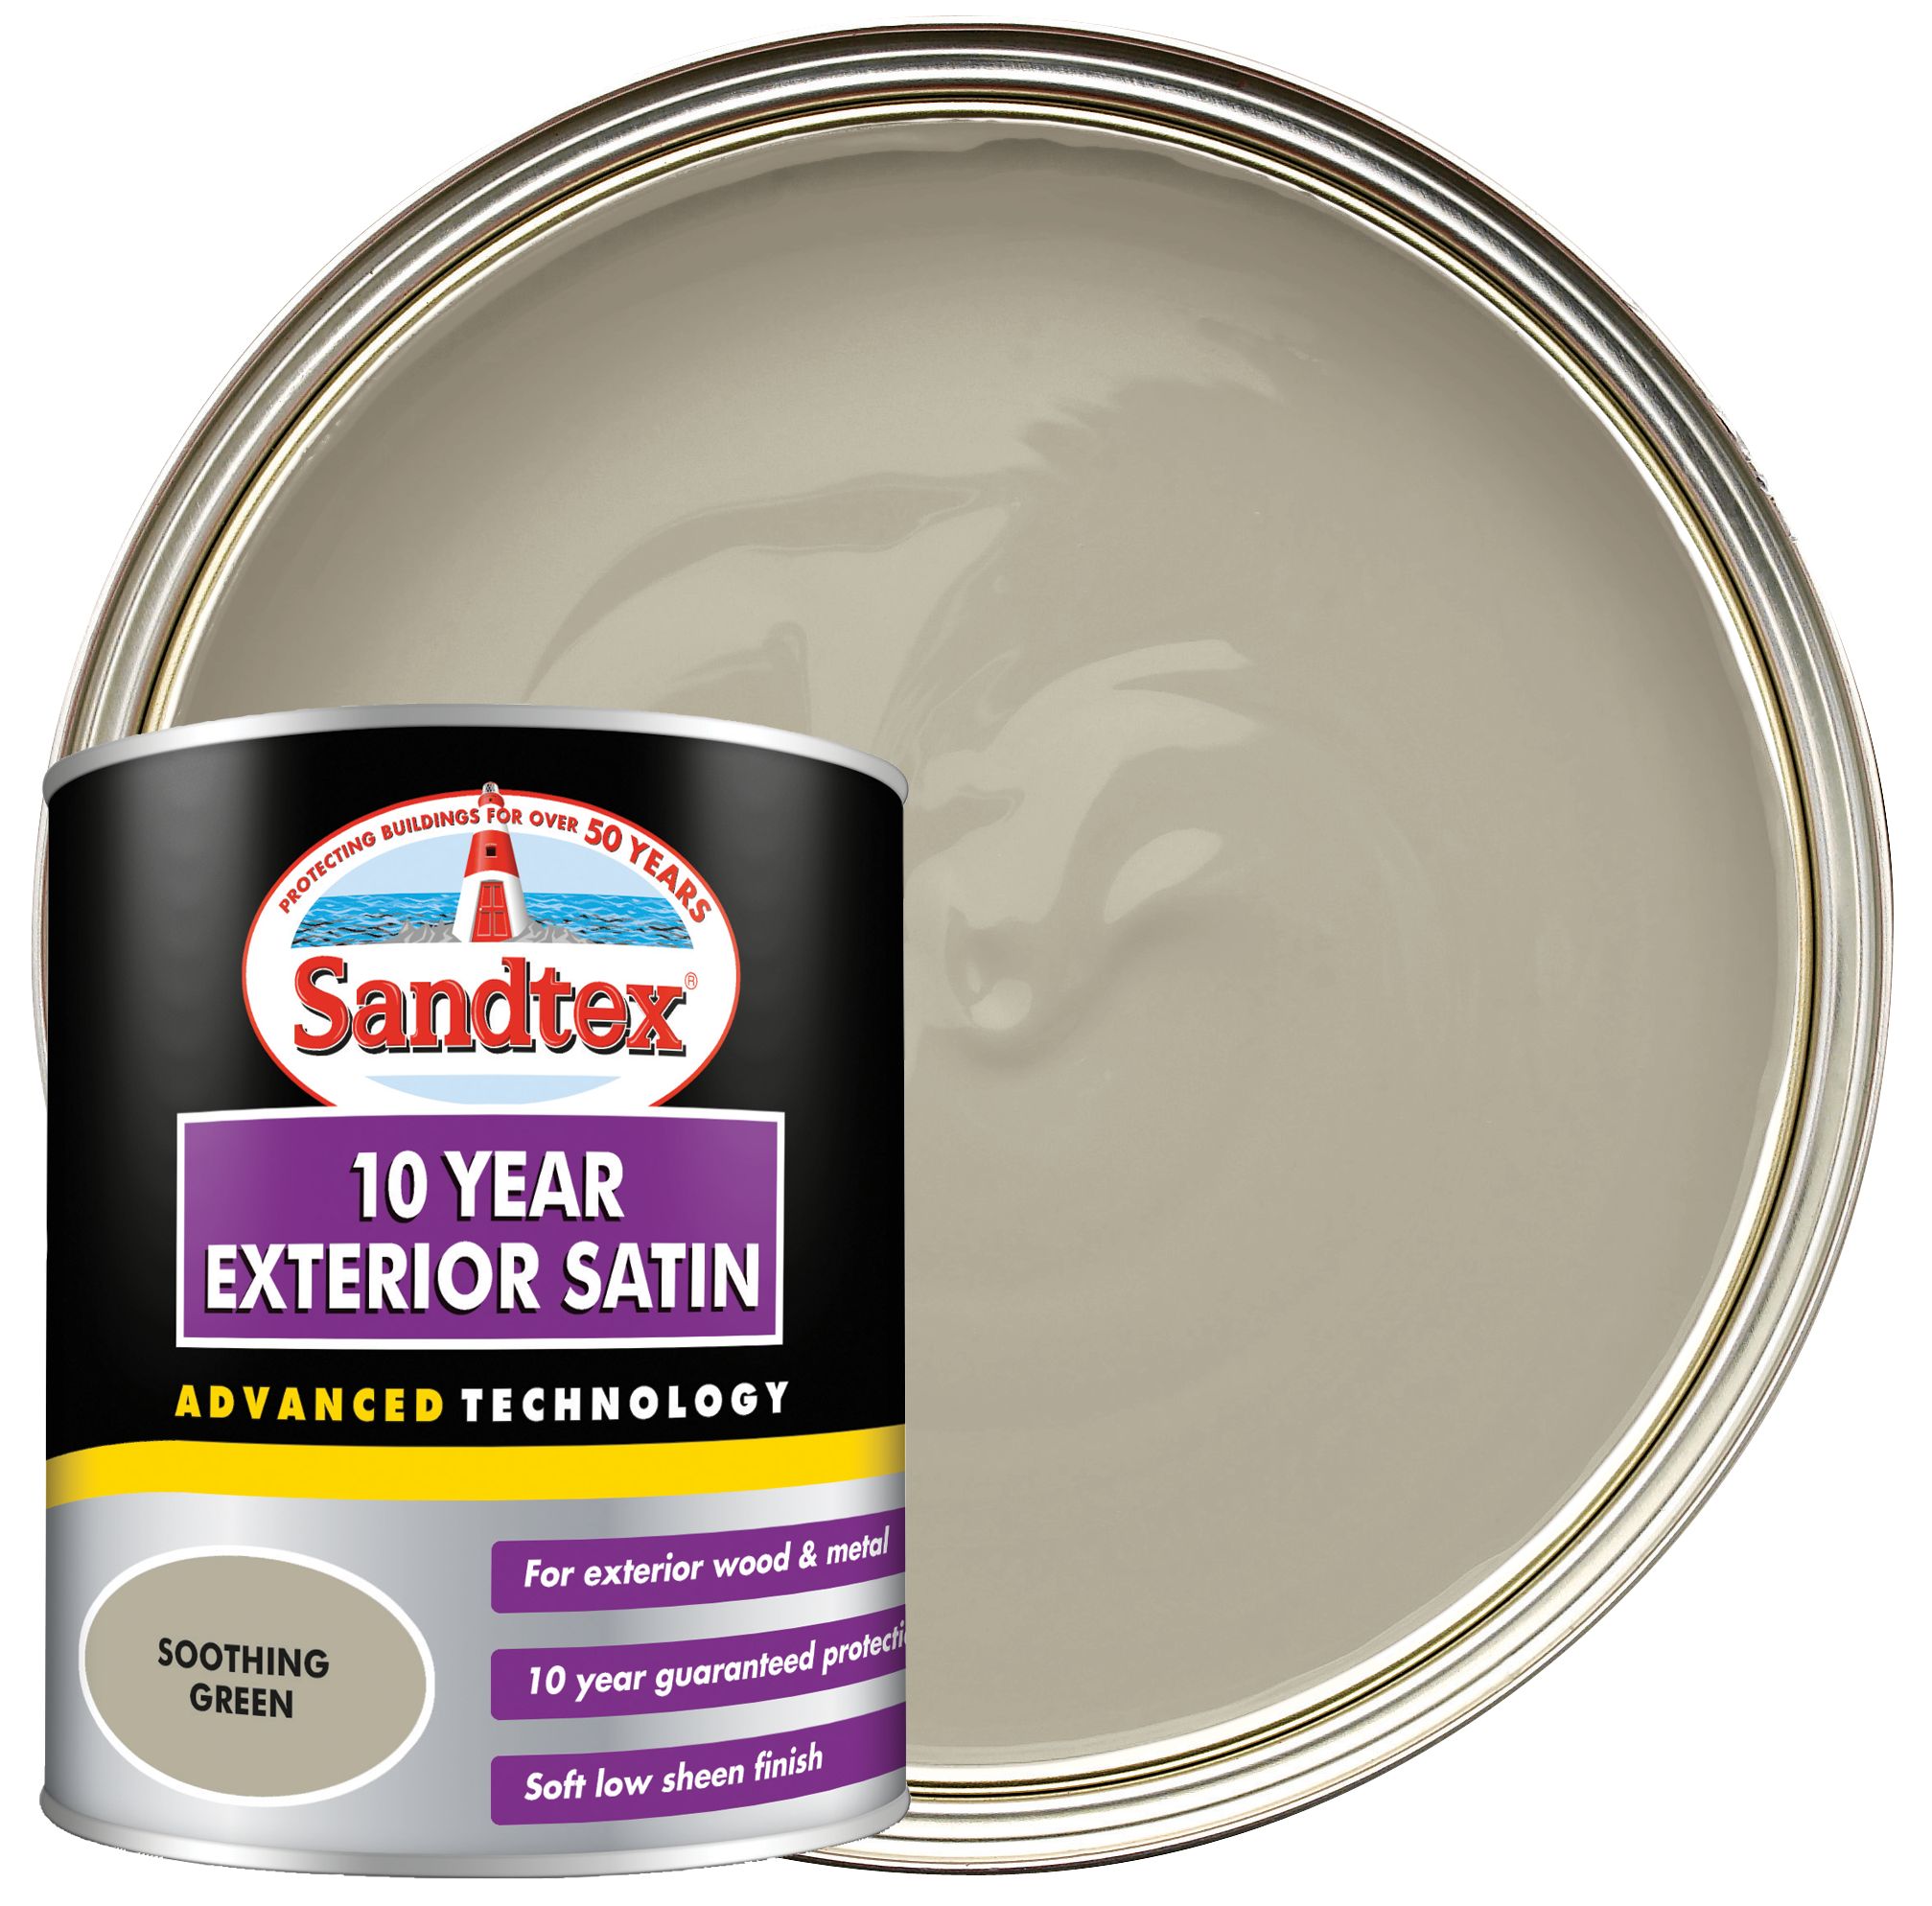 Sandtex 10 Year Exterior Satin Paint - Soothing Green - 750ml